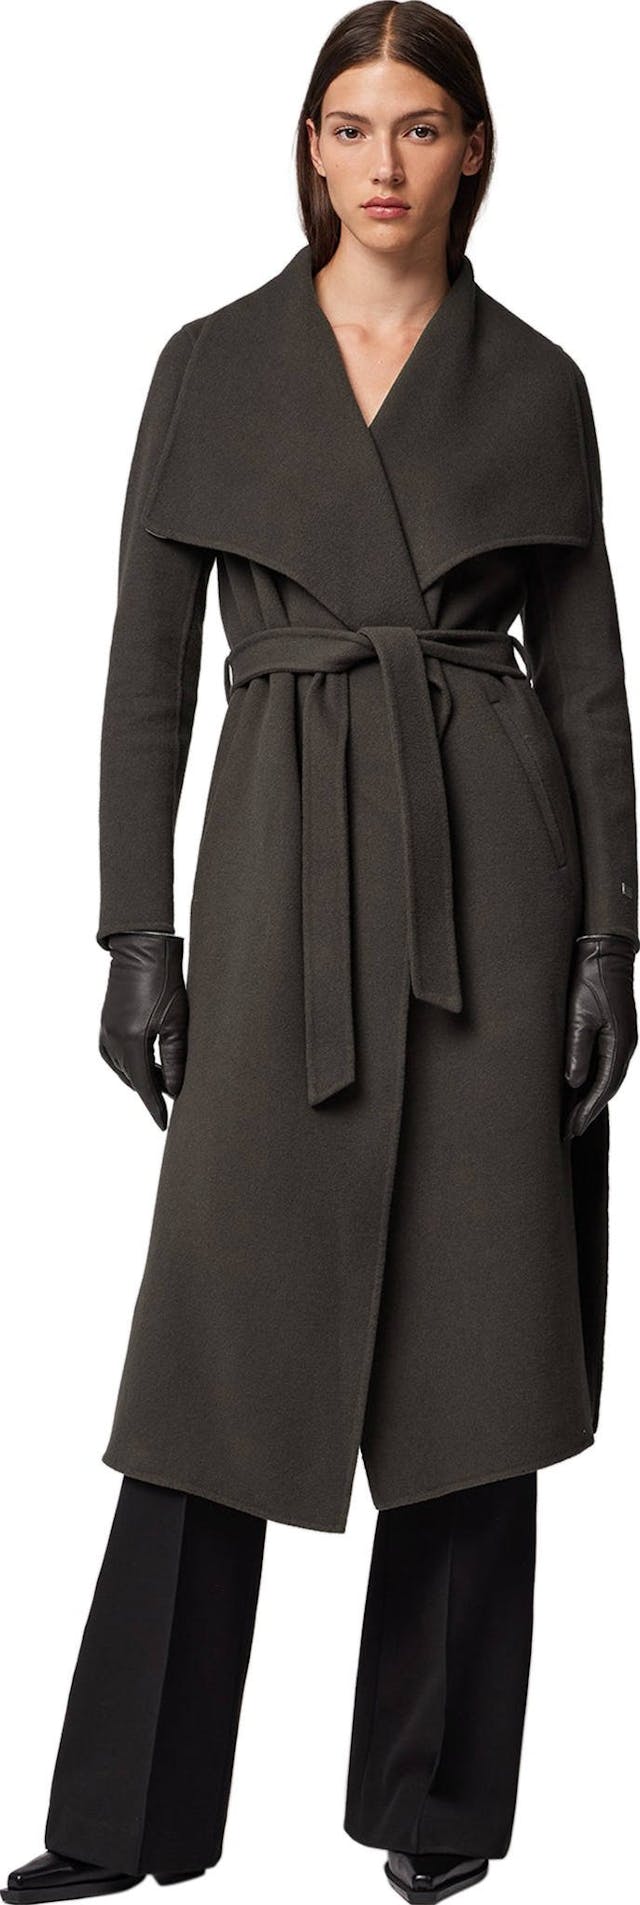 Product image for Britta Straight-Fit Double Face Wool Coat with Belt - Women's